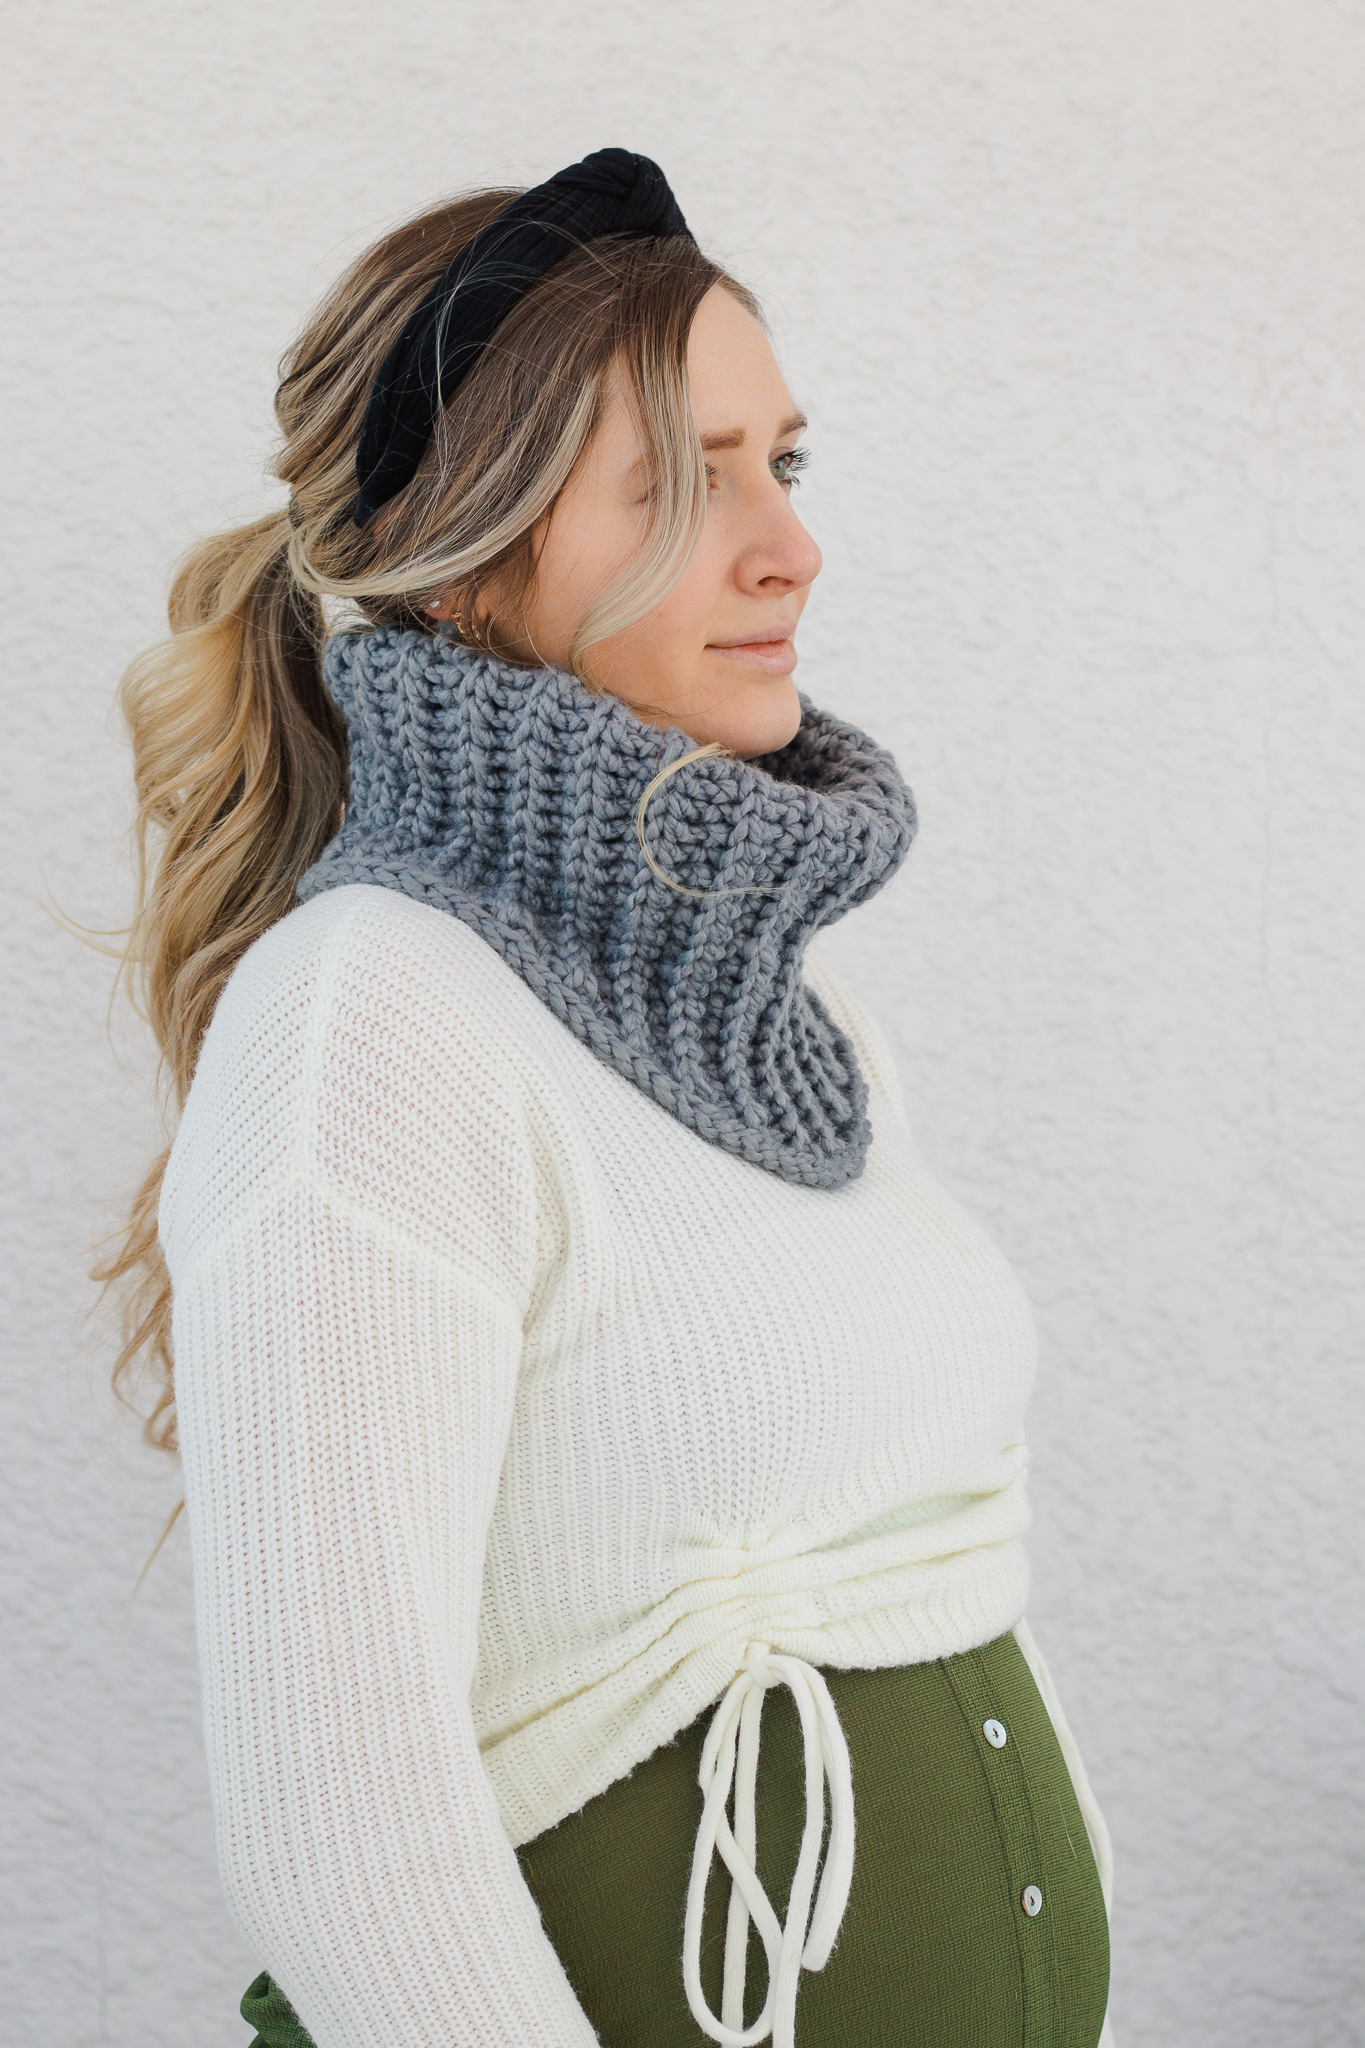 Knit Kit: Learn To Knit - Beginner Level (Headband or Cowl Option)